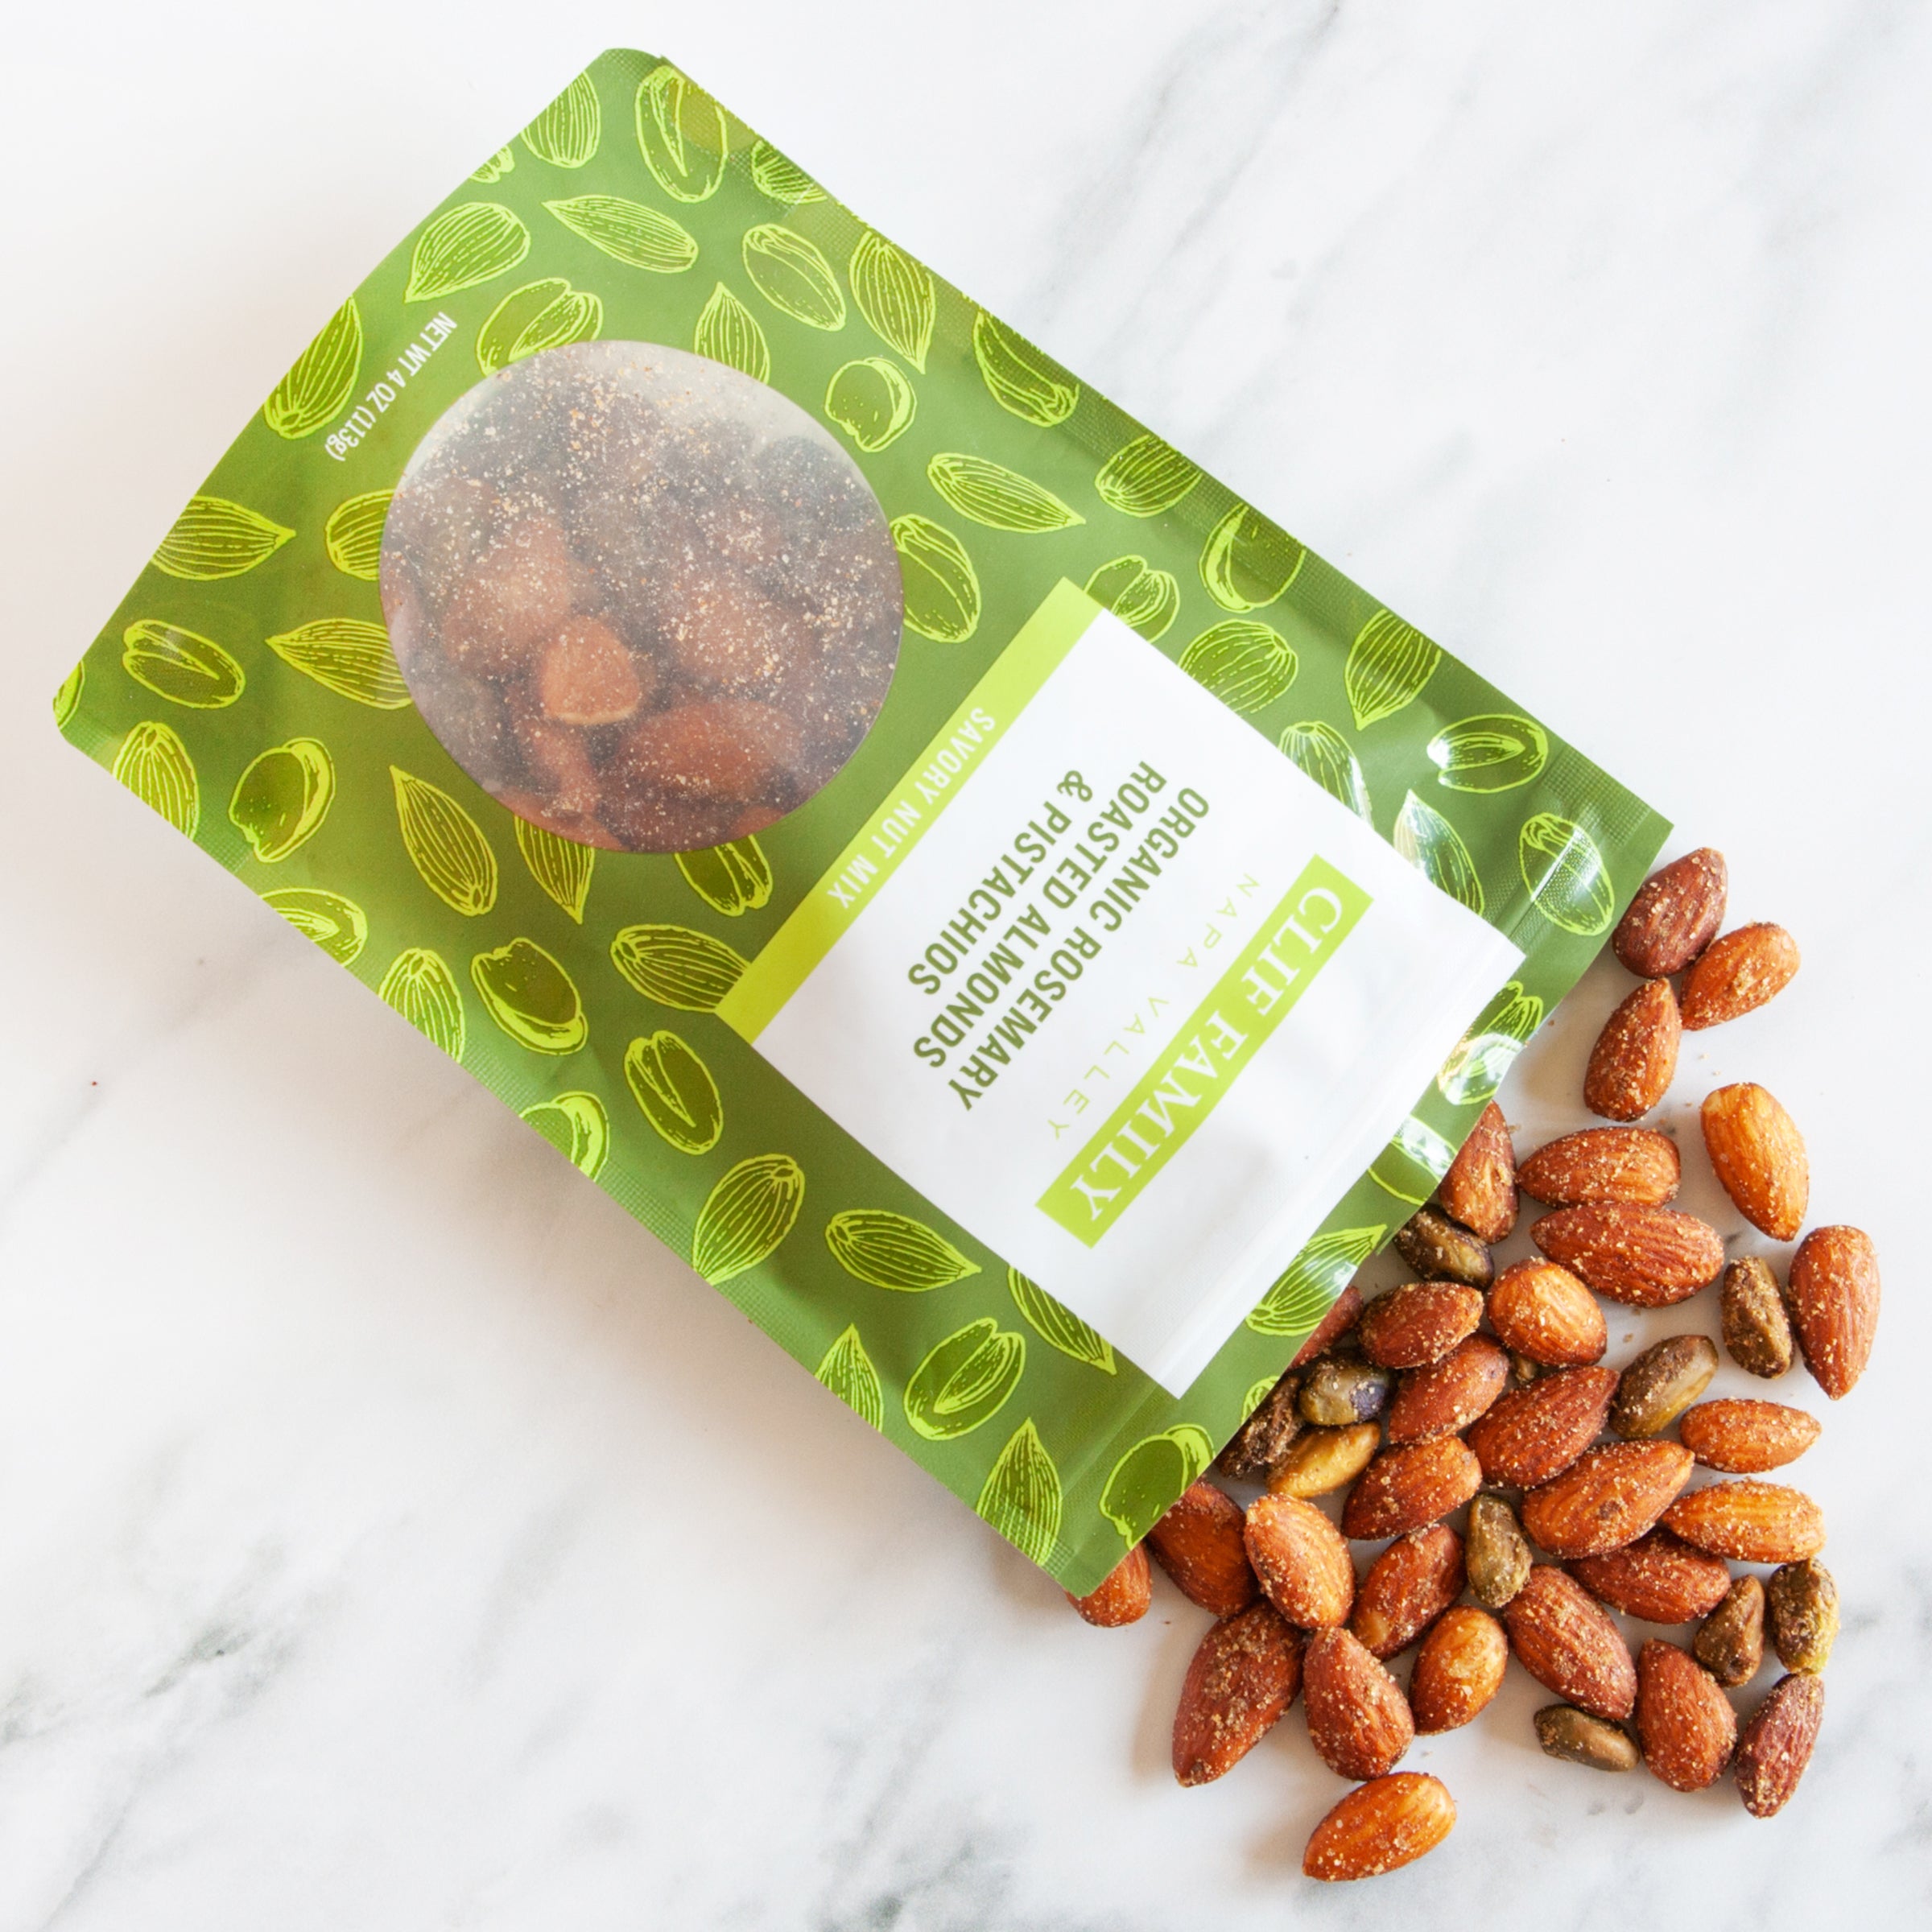 Rosemary Almonds and Pistachios_Clif Family Winery_Dried Fruits, Nuts & Seeds